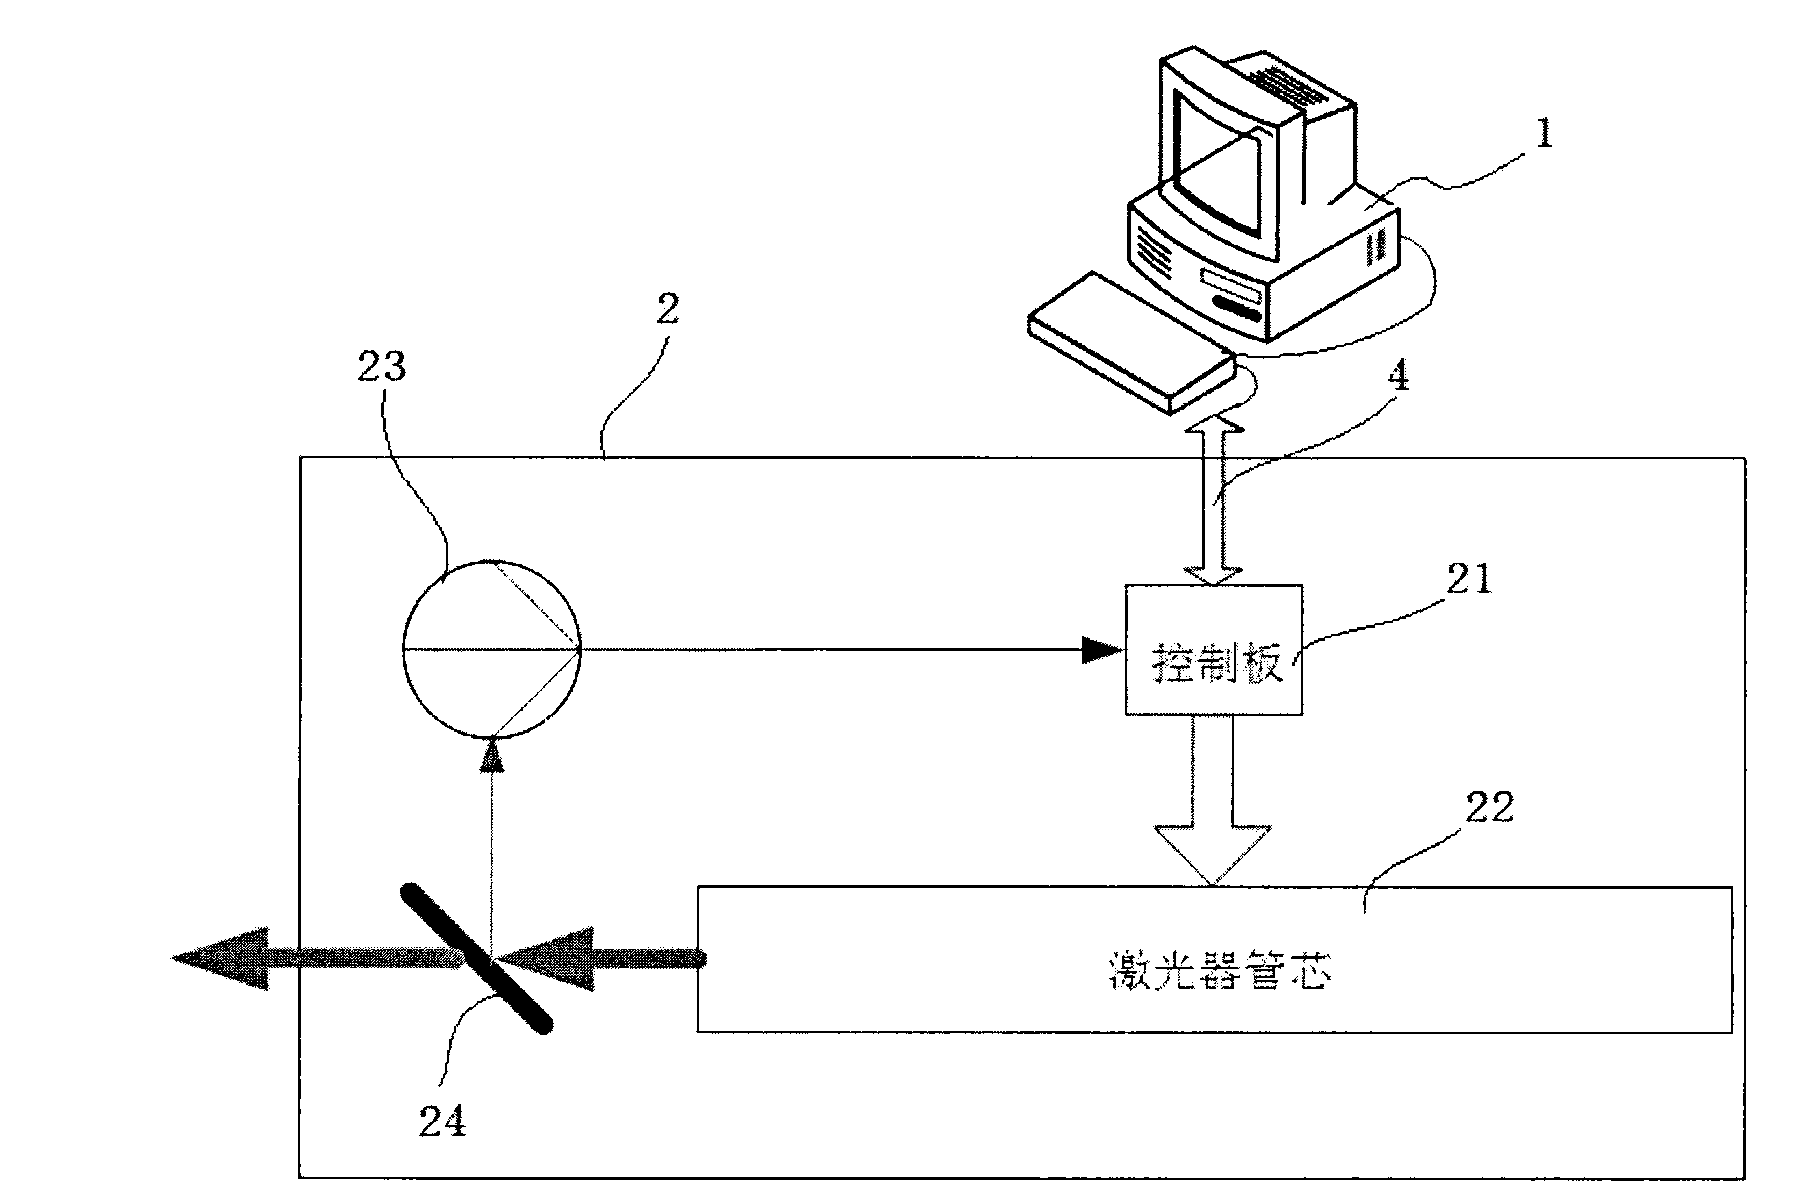 Light power optimization control system for metallic-seal radio-frequency carbon dioxide laser